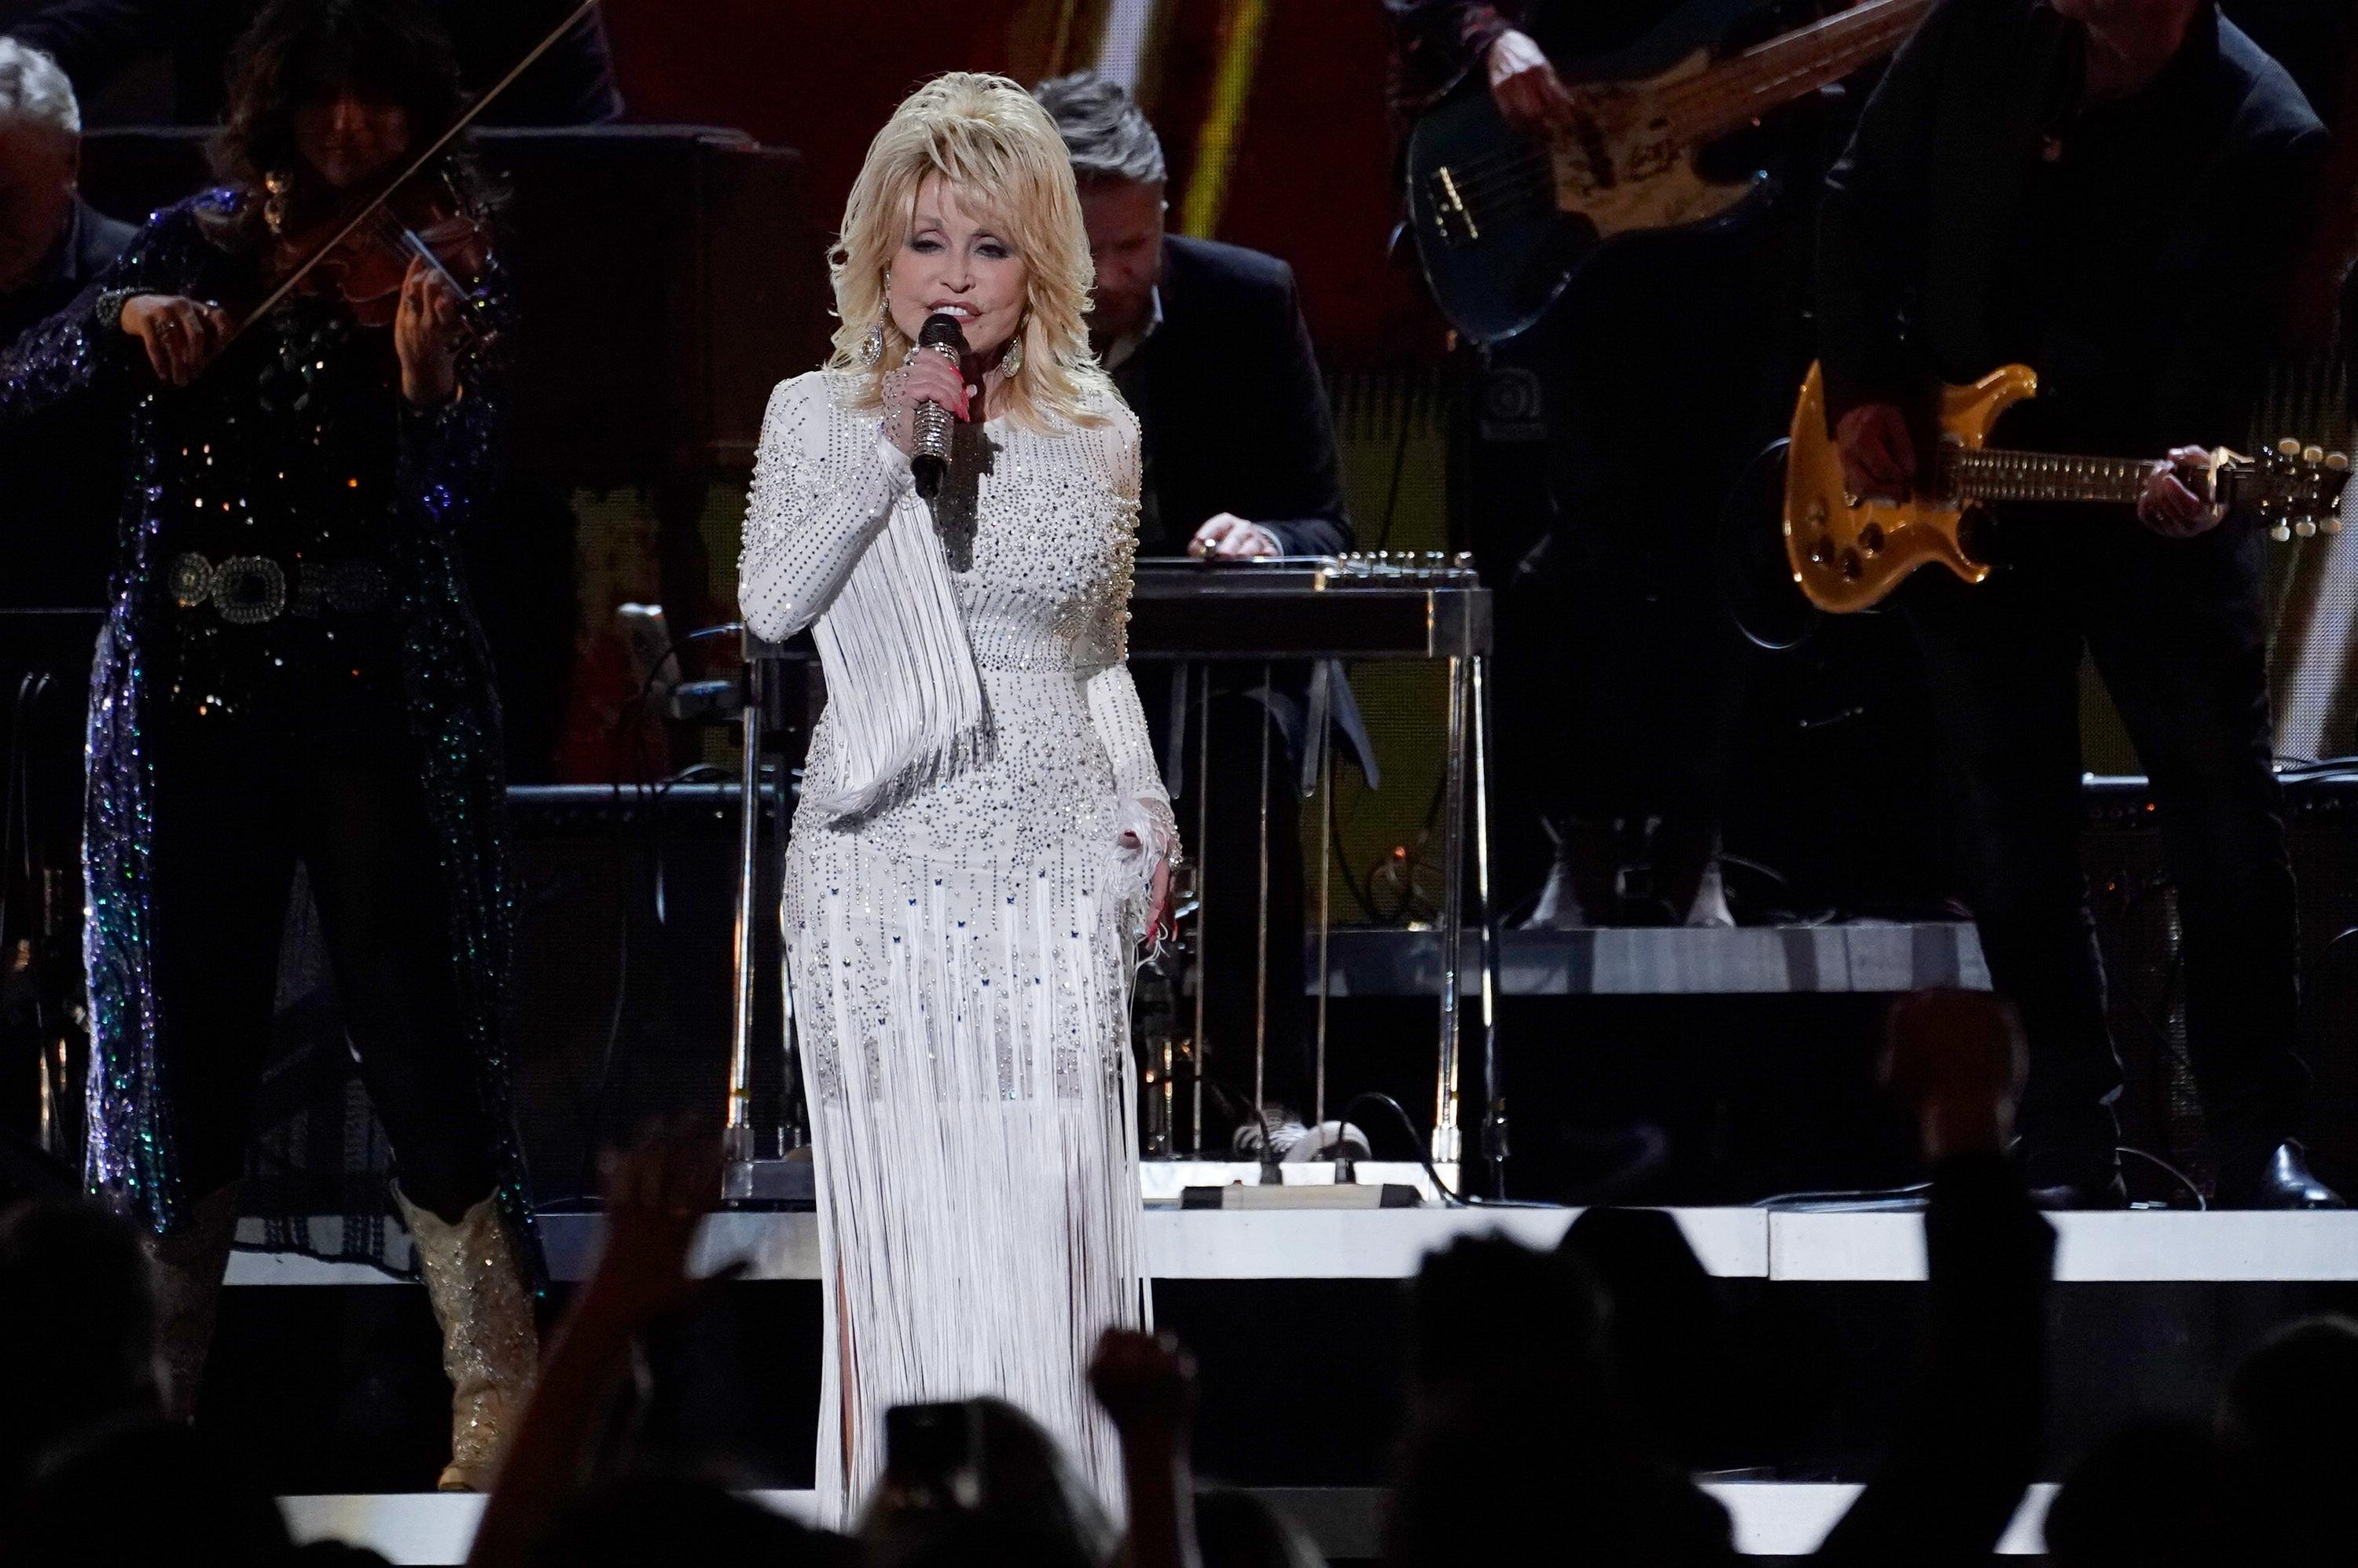 Dolly Parton sings on stage in a white fringed dress